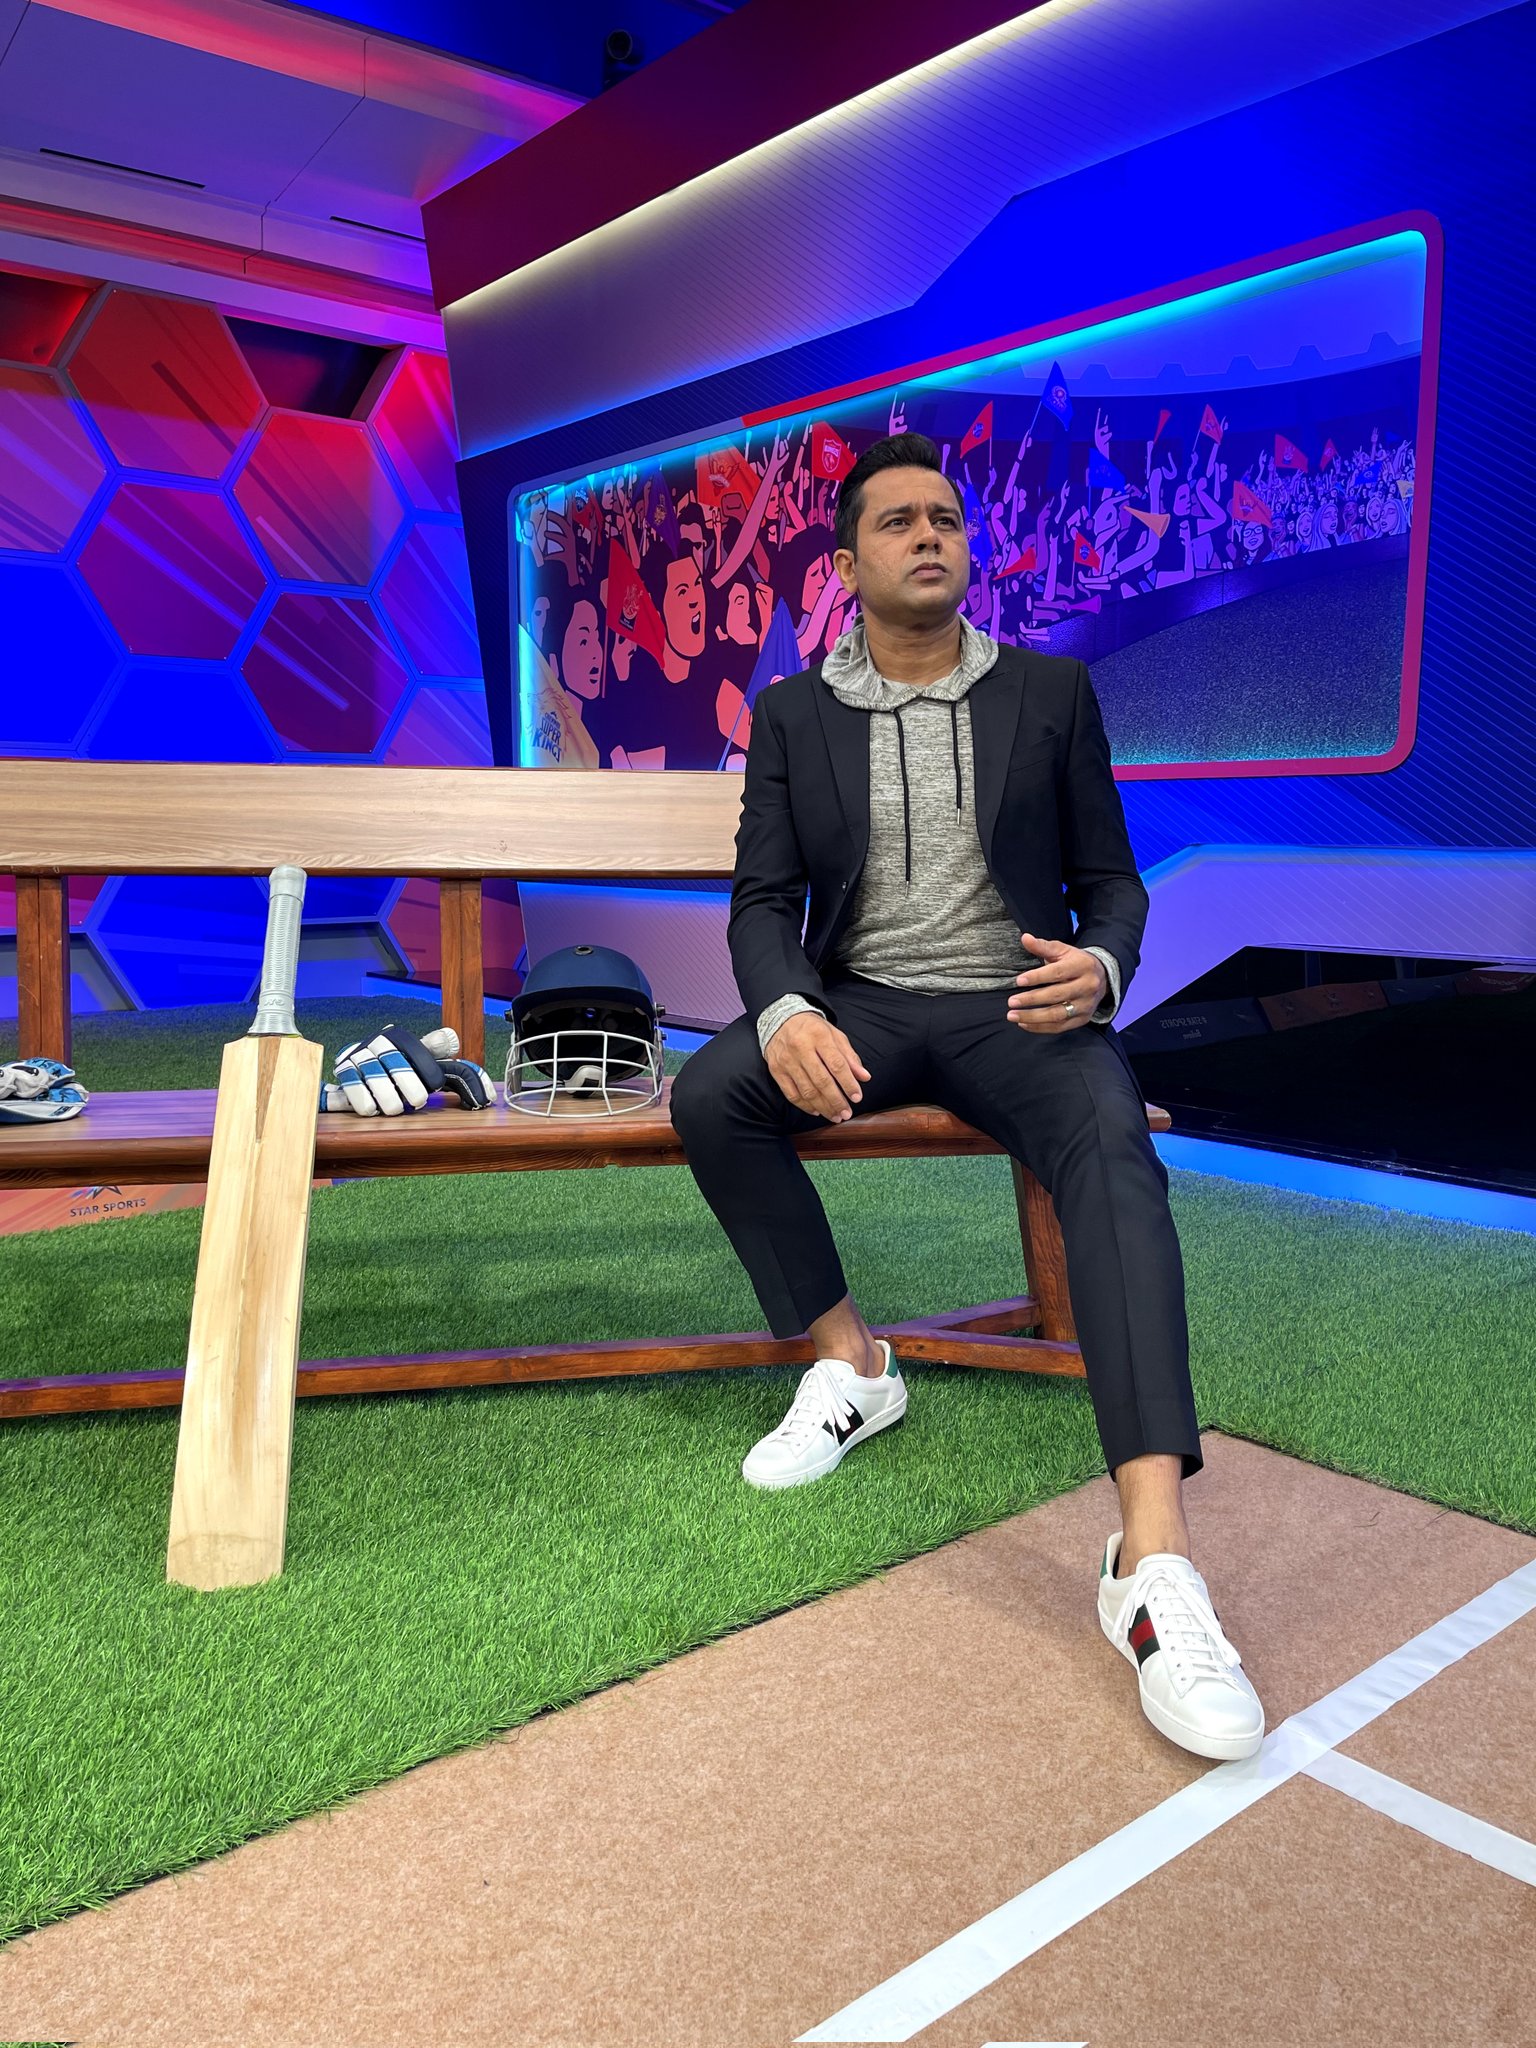 Previous World T20 seemed like Kieron Pollard's friends came to party together, bluntly claims Aakash Chopra 